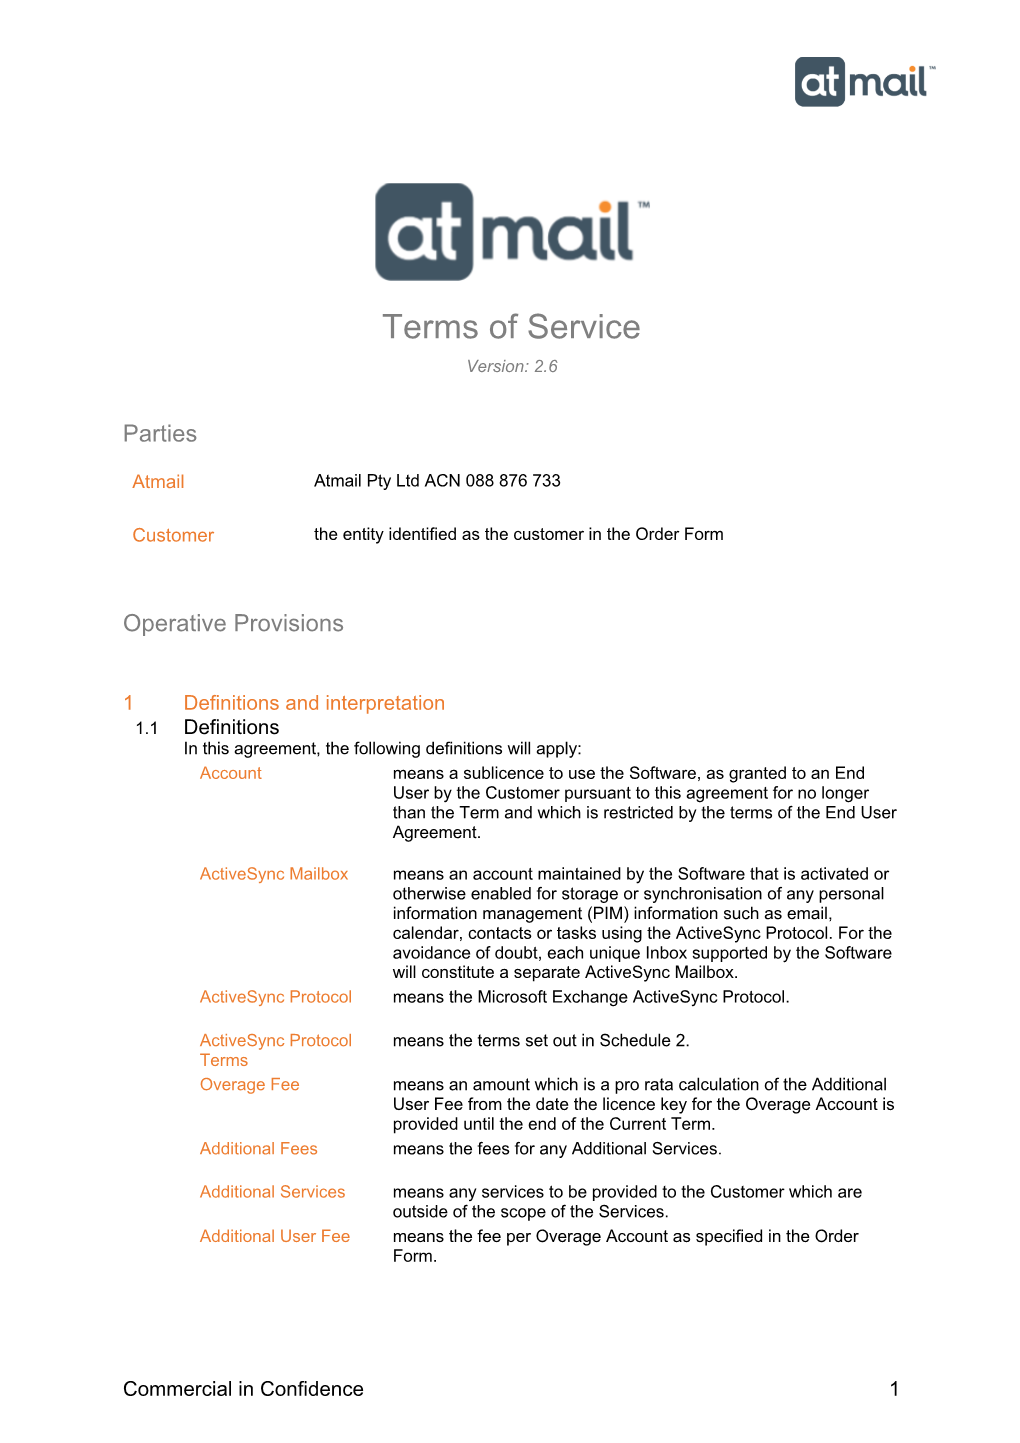 Atmail Terms of Service V2.6